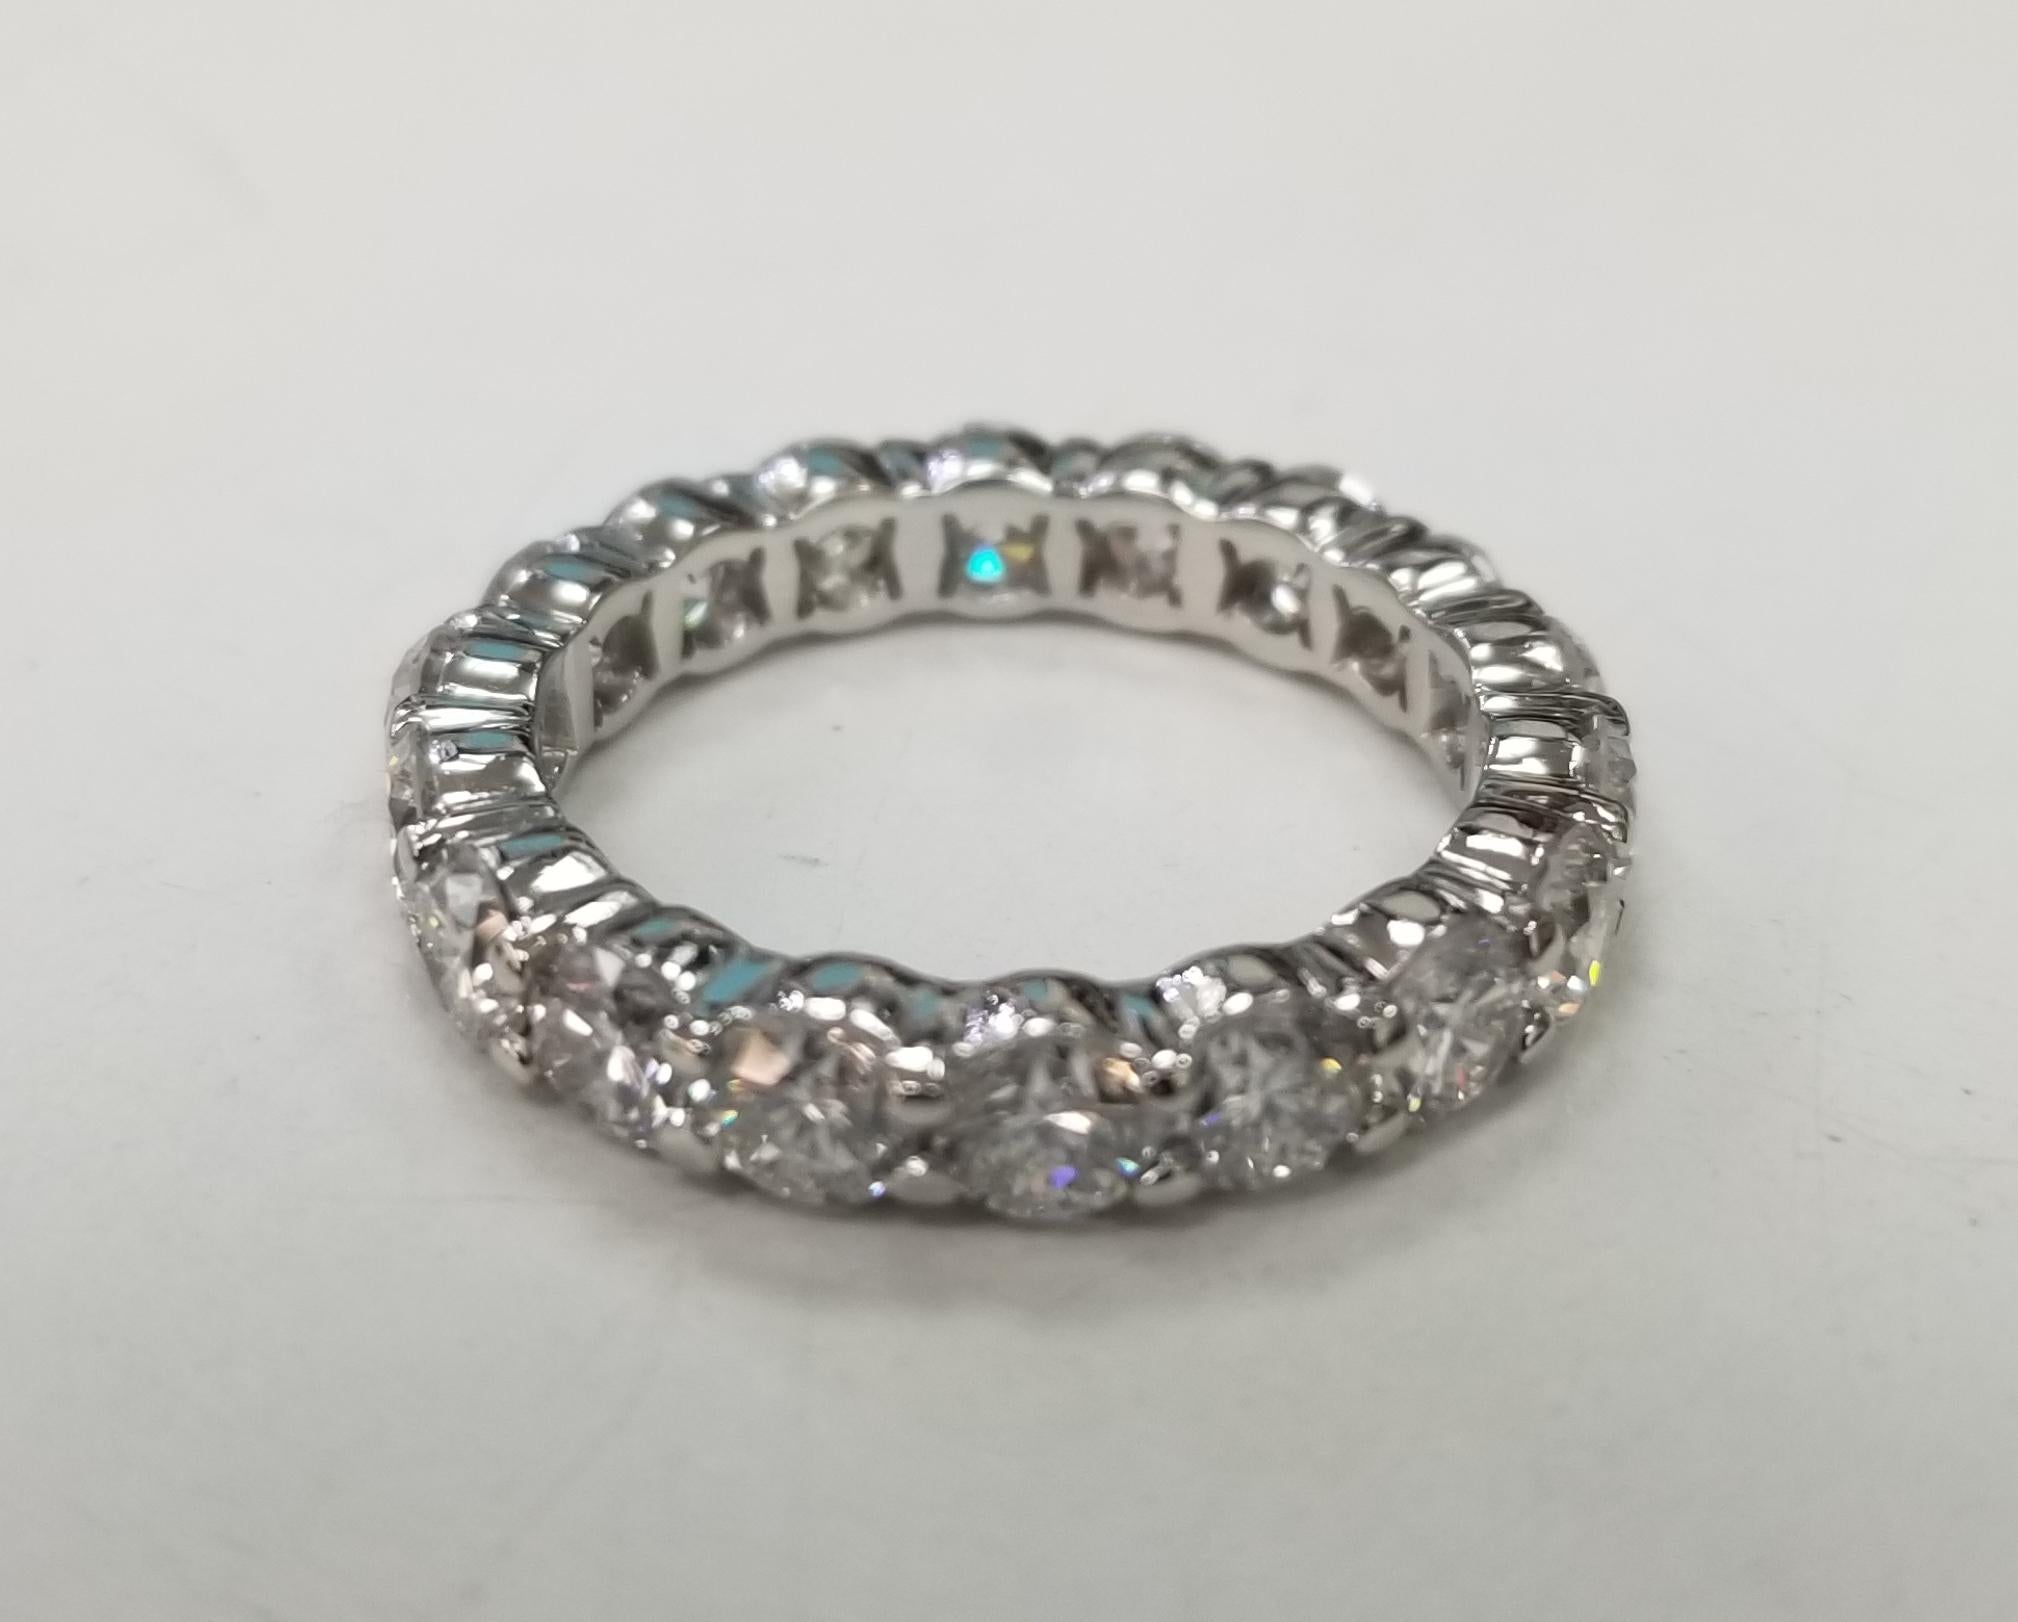 Platinum 3.65 Carats diamond eternity ring set with shared prongs
Specifications:
    main stone: BRILLIANT CUT DIAMOND
    diamonds: 19 PIECES
    carat total weight: 3.65
    color:  F-G
    clarity: VS1 
    metal: Platinum
    width: 3mm
   